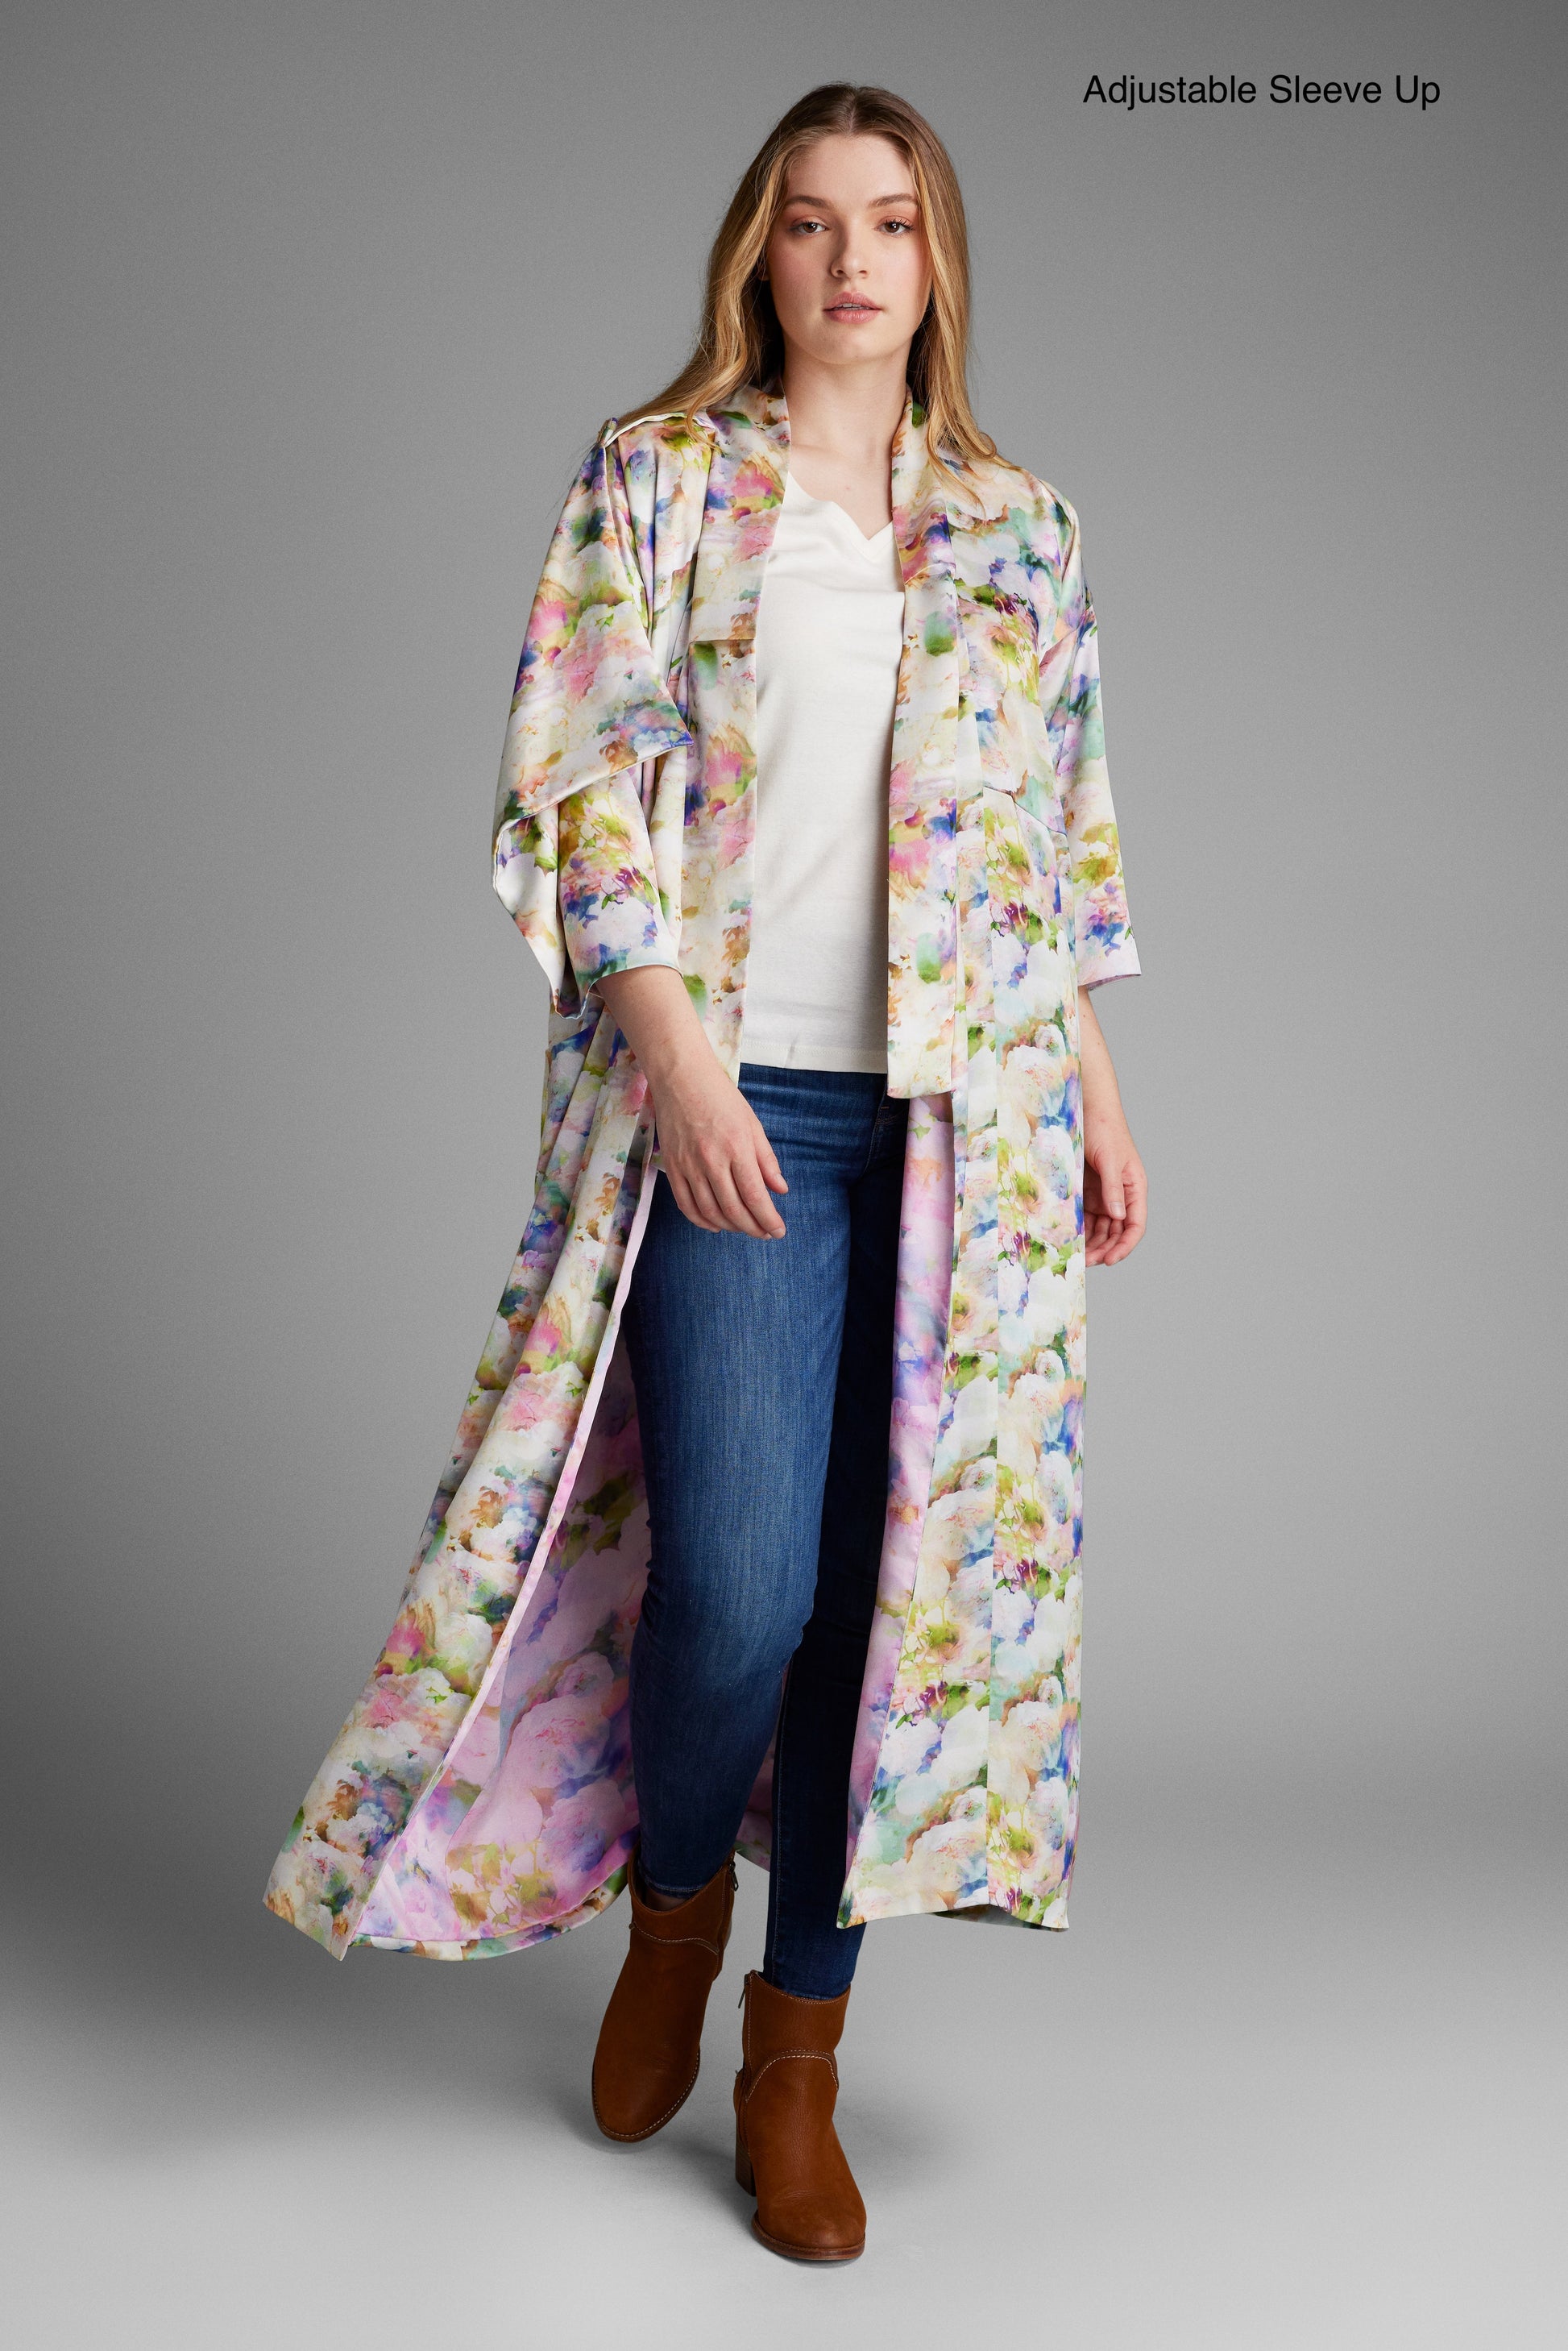 Front profile of woman wearing an all over floral printed kimono duster made from recycled textiles 6